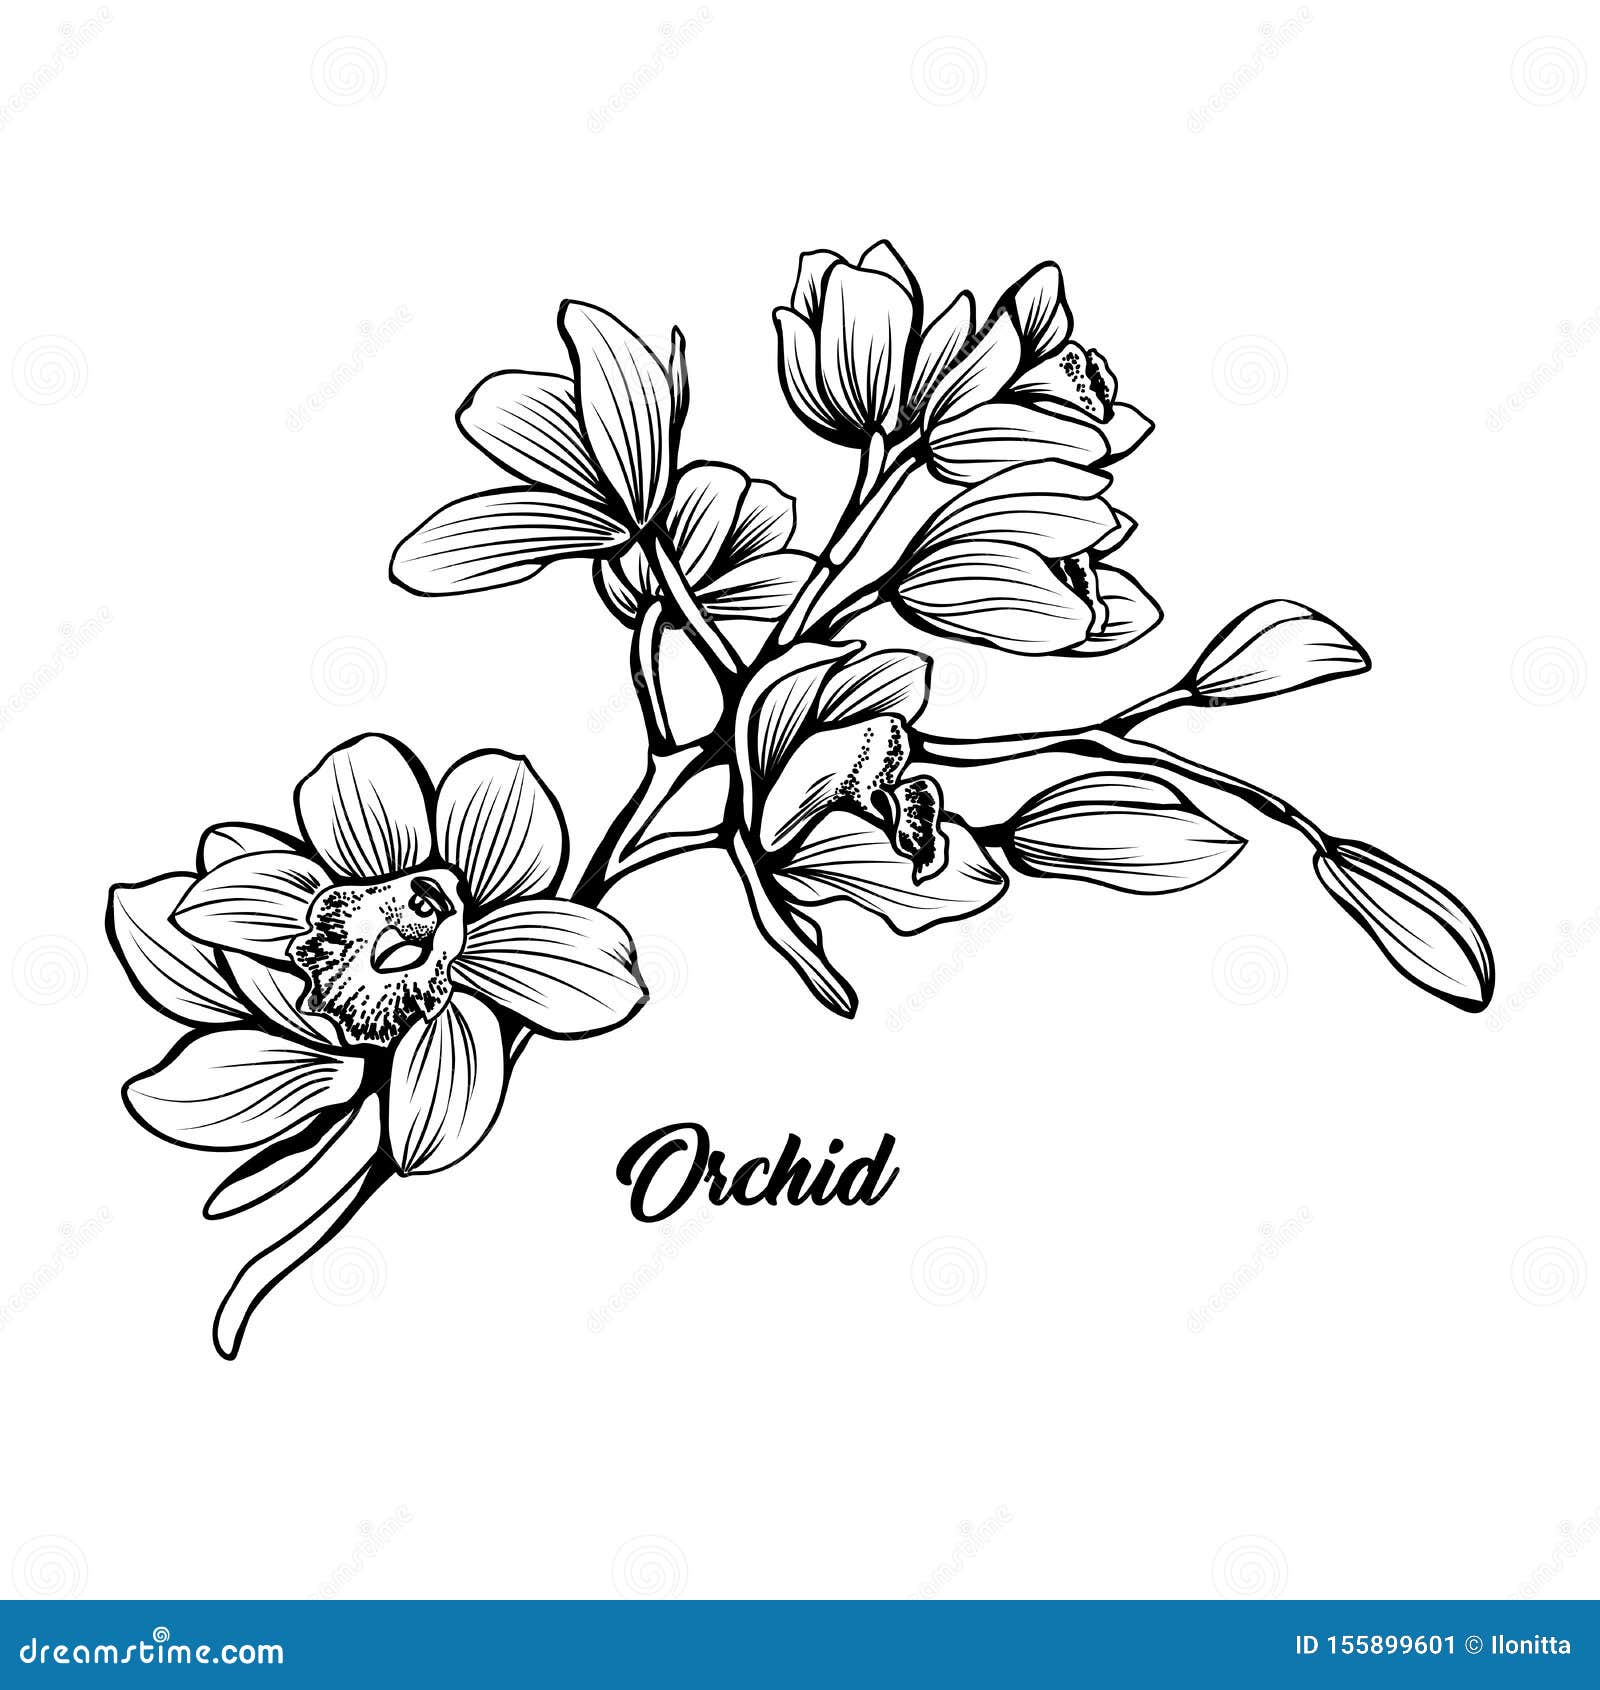 Pencil drawing Orchid flowers  Orchid drawing Orchid tattoo Drawings